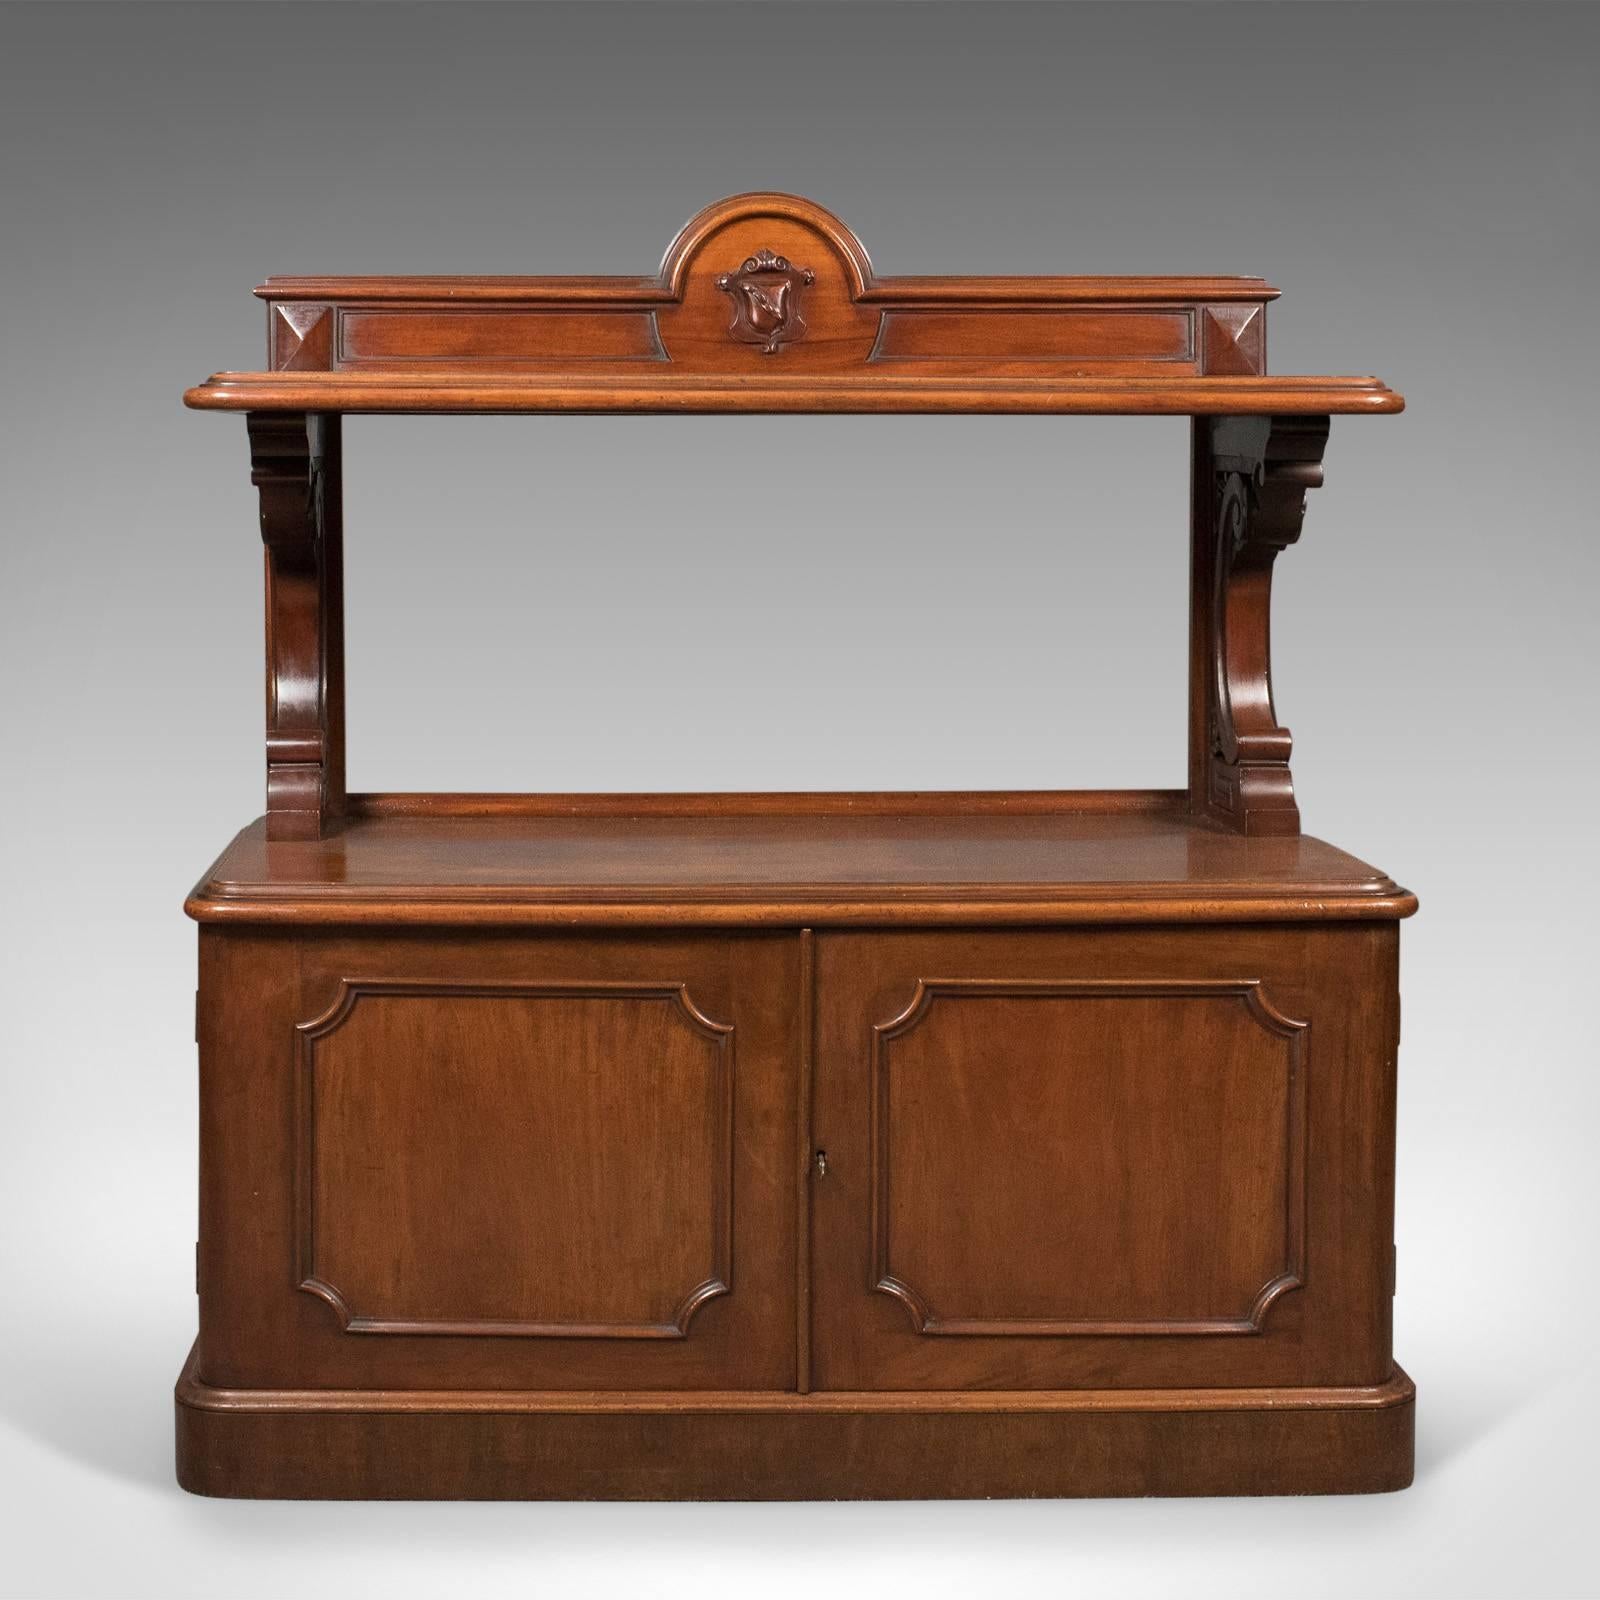 This is an antique buffet, a Scottish server cabinet in mahogany dating to the mid-Victorian period, circa 1870.

Pleasingly patinated and good color throughout
Deep russet tones in the generous stocks of choice mahogany 
Raised on a continuous